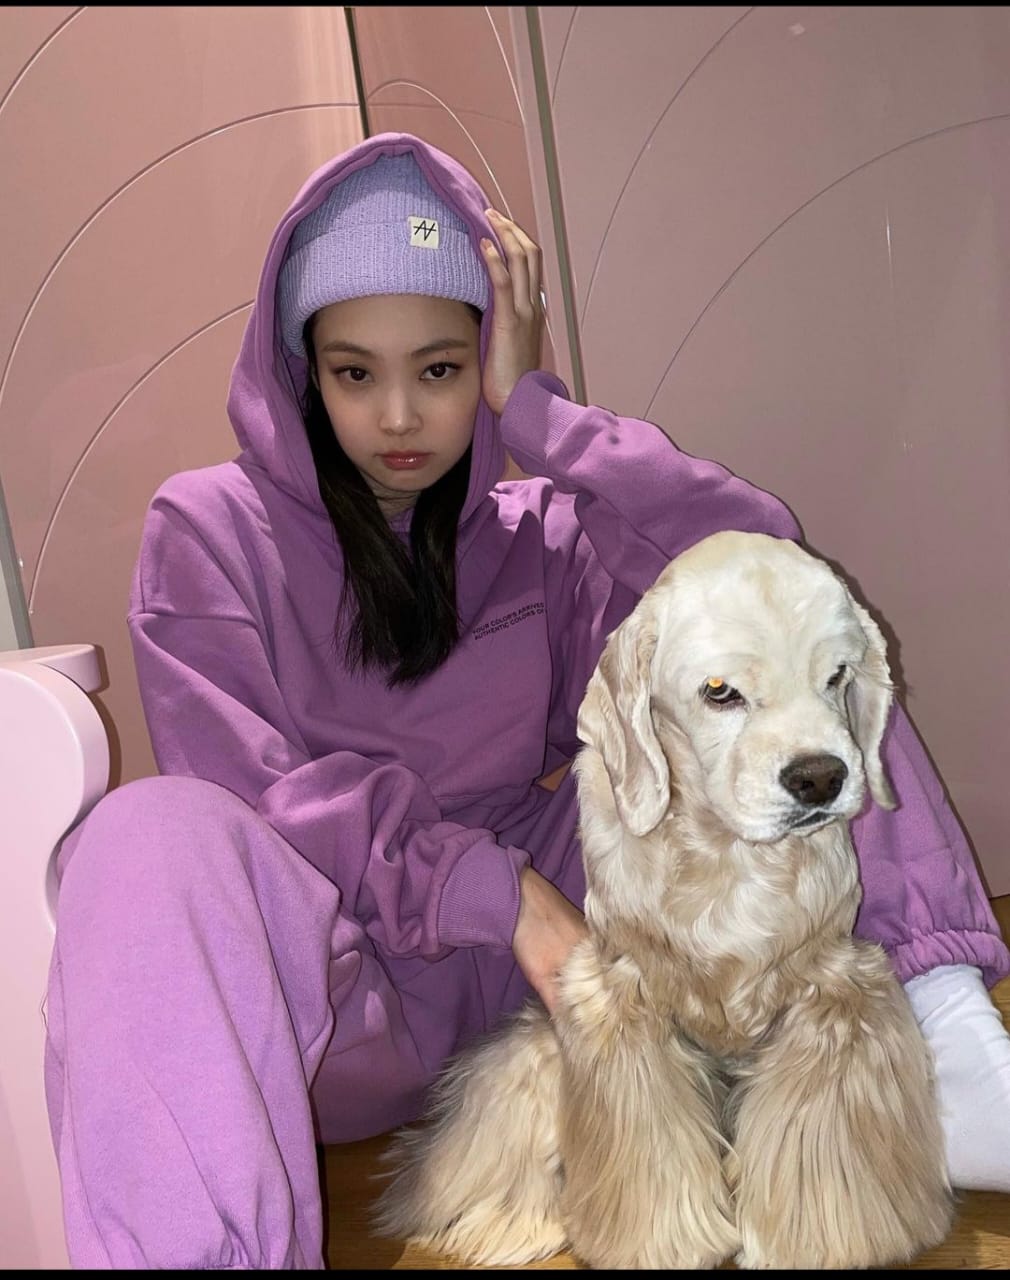 Pet Love: Blackpink's Jennie shares adorable photo with her pet dog, fans go all 'aww'